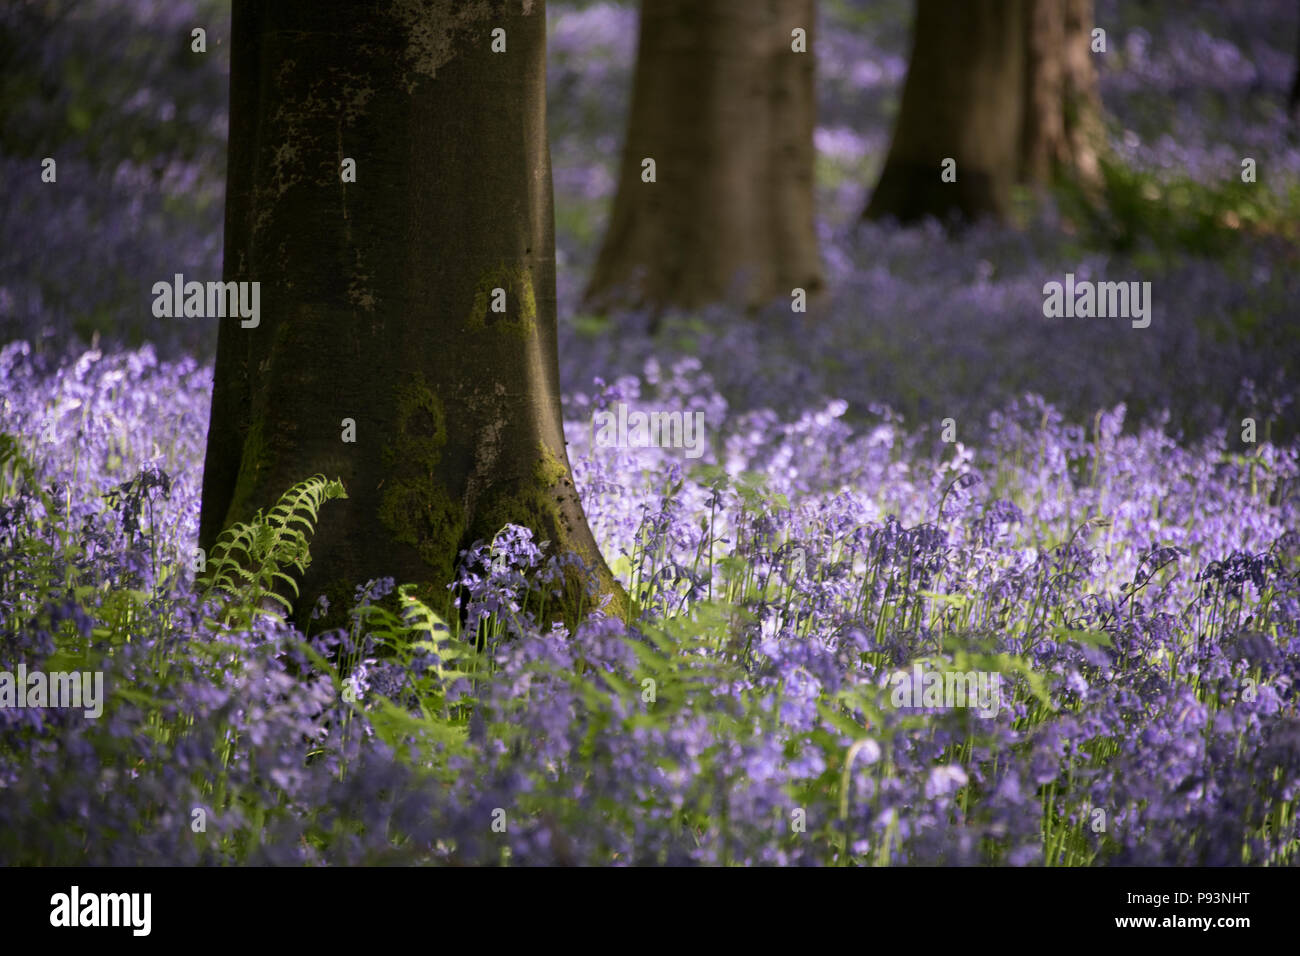 Micheldever Woods in Hampshire. Stock Photo